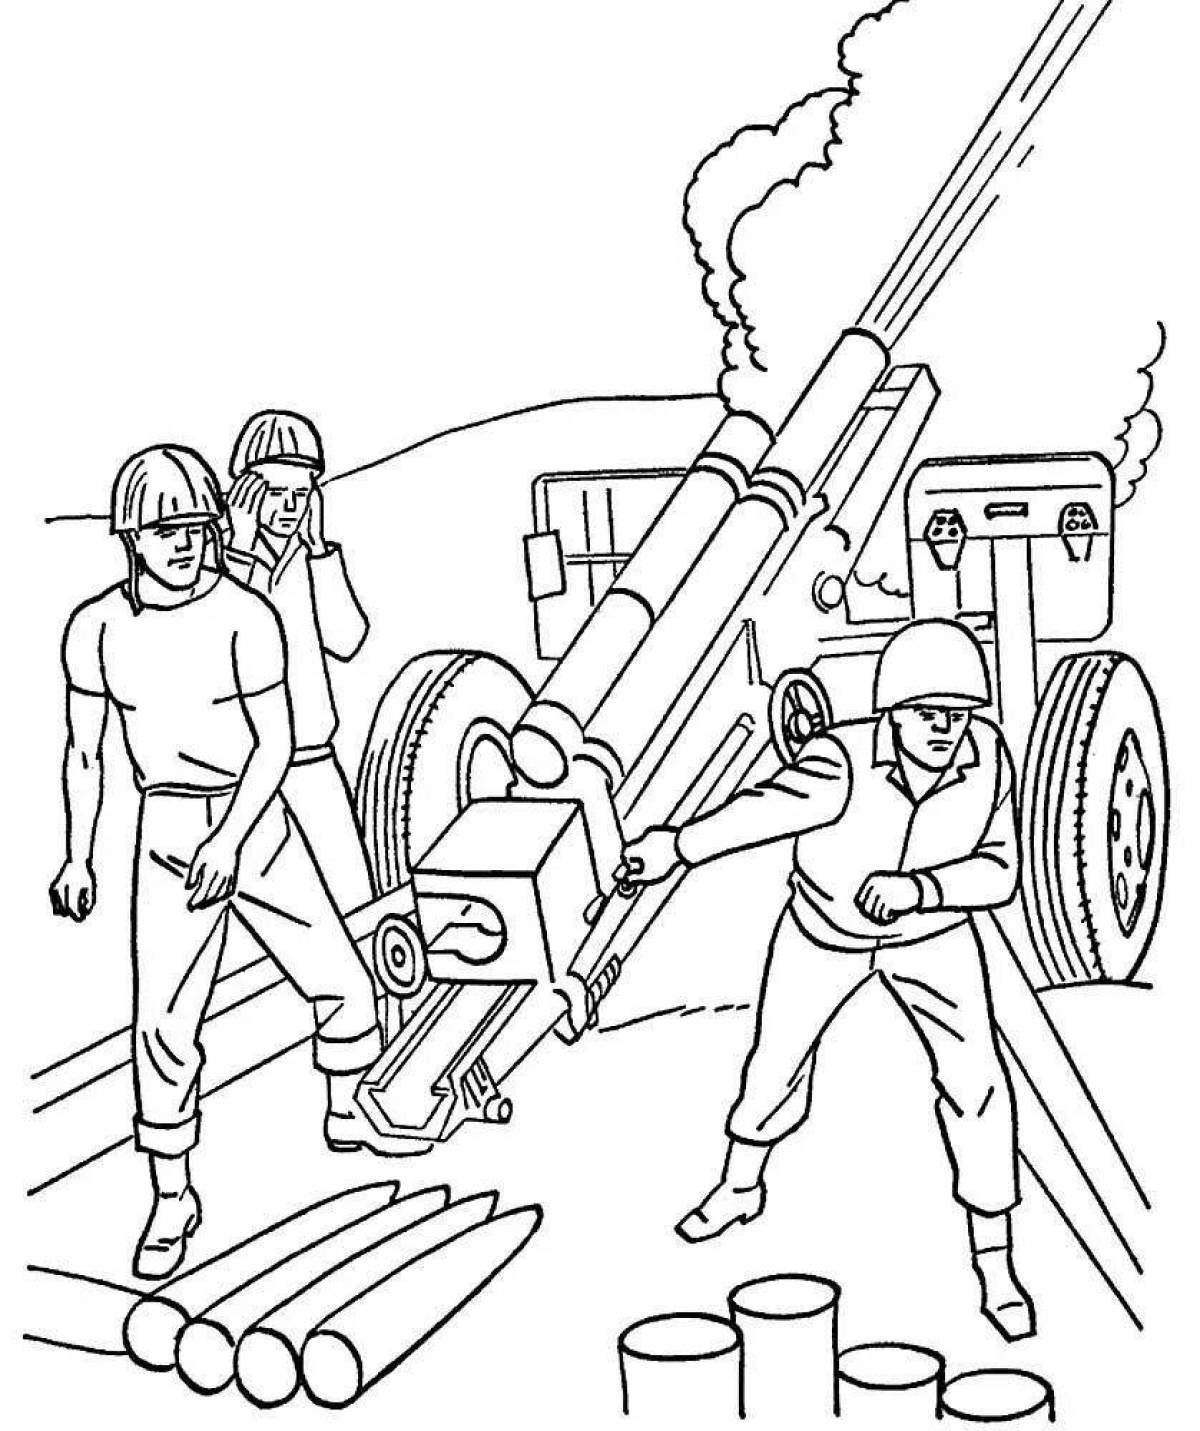 Large military drawing coloring page